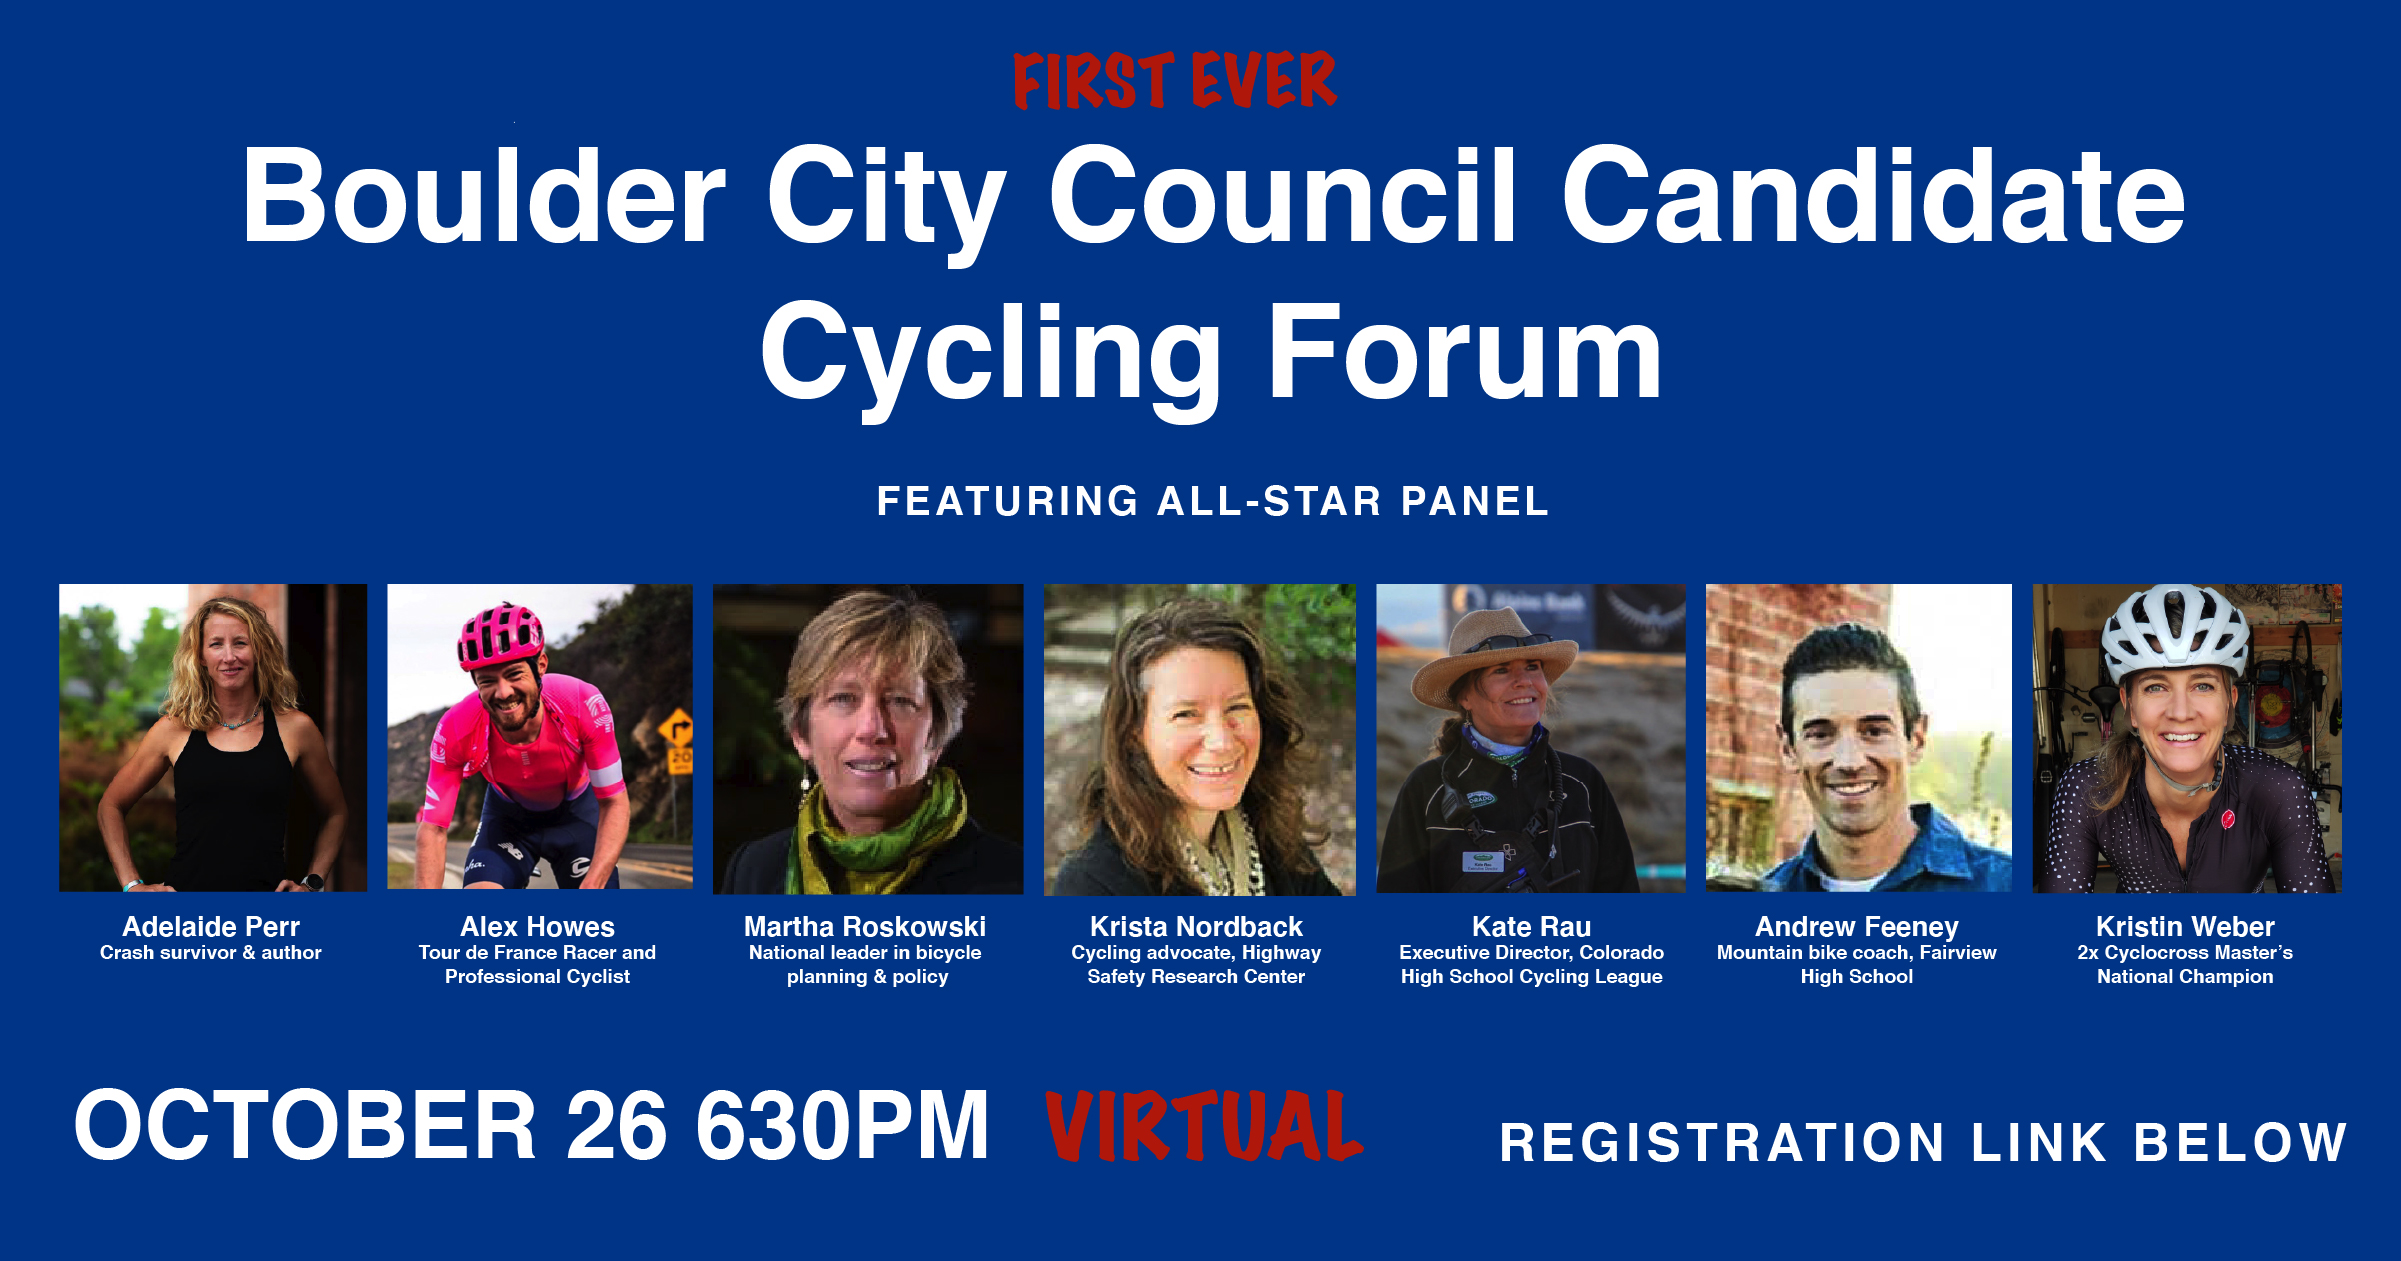 Link to Registration for Cycling Forum